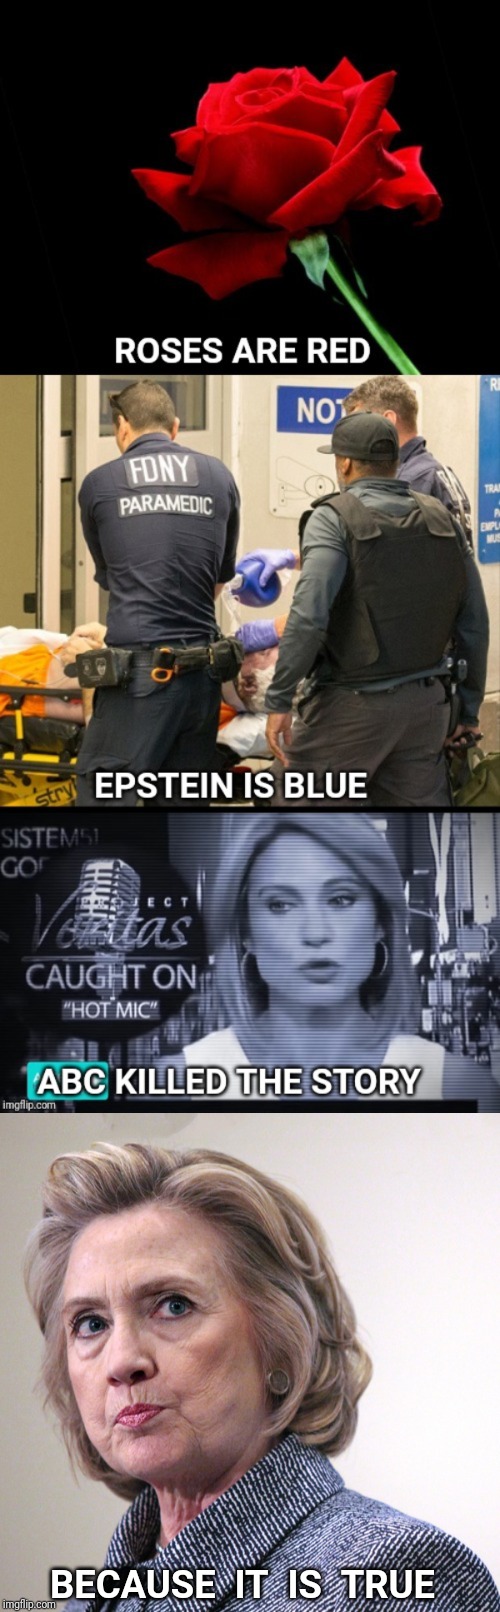 BECAUSE  IT  IS  TRUE | image tagged in roses are red,jeffrey epstein,hillary clinton,bill clinton,abc | made w/ Imgflip meme maker